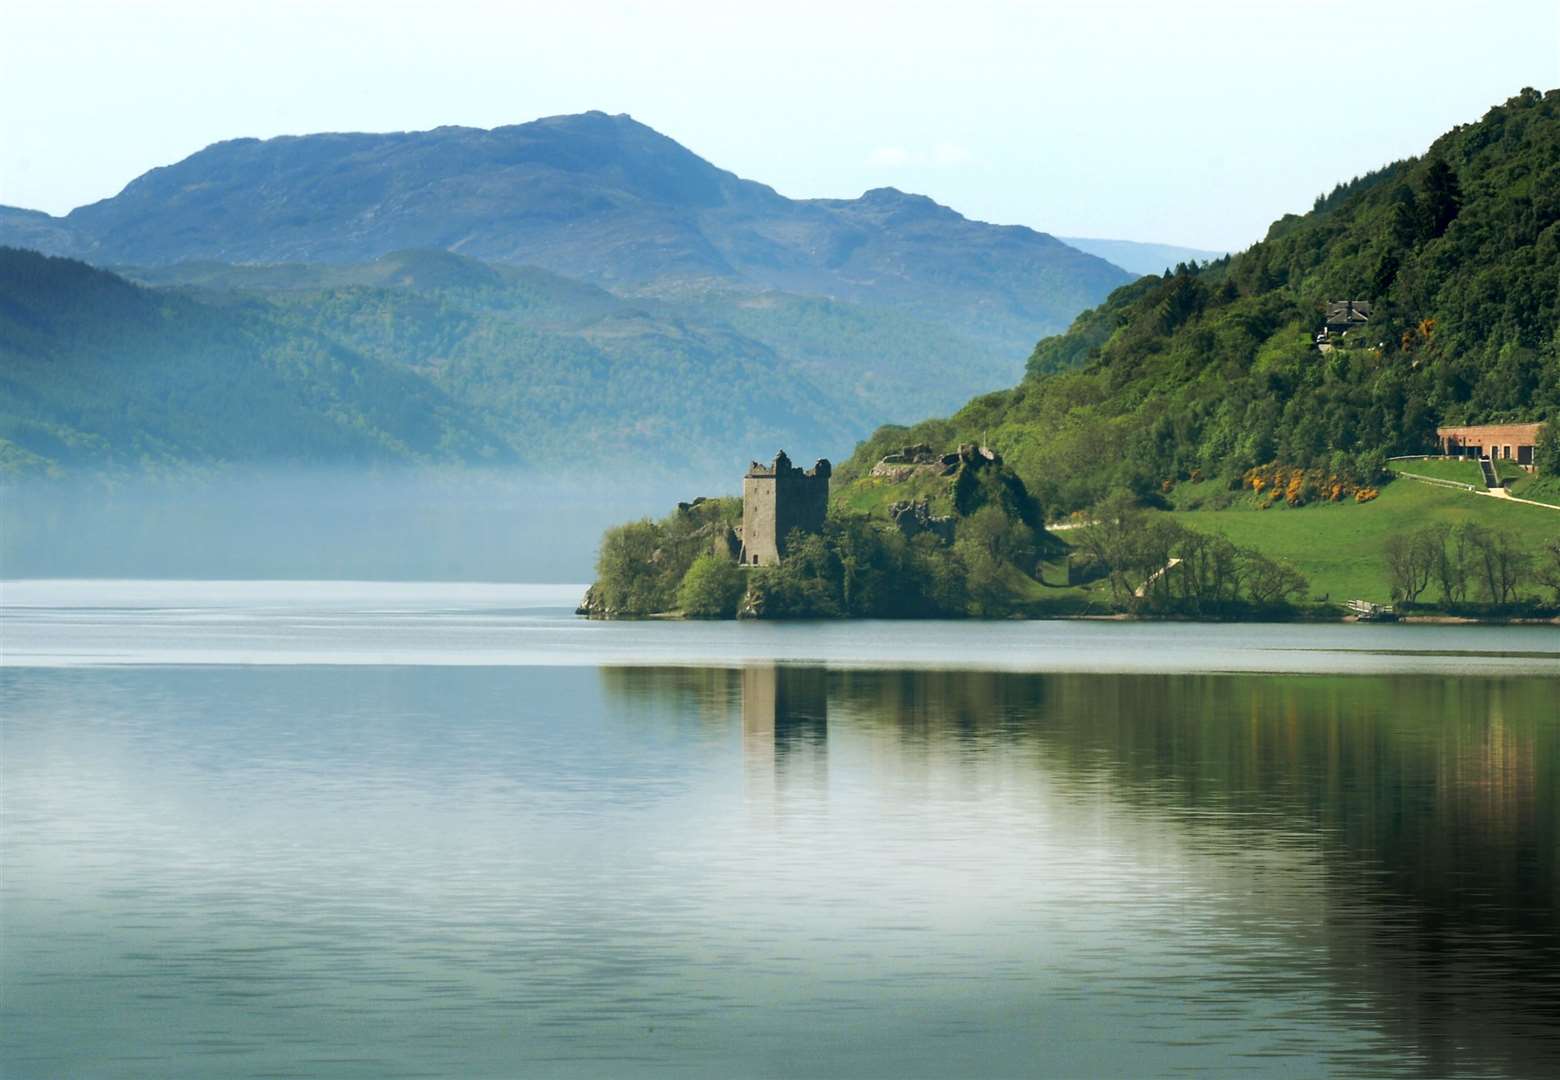 Numbers of Nessie sightings have remained strong in 2020 despite the coronavirus pandemic.